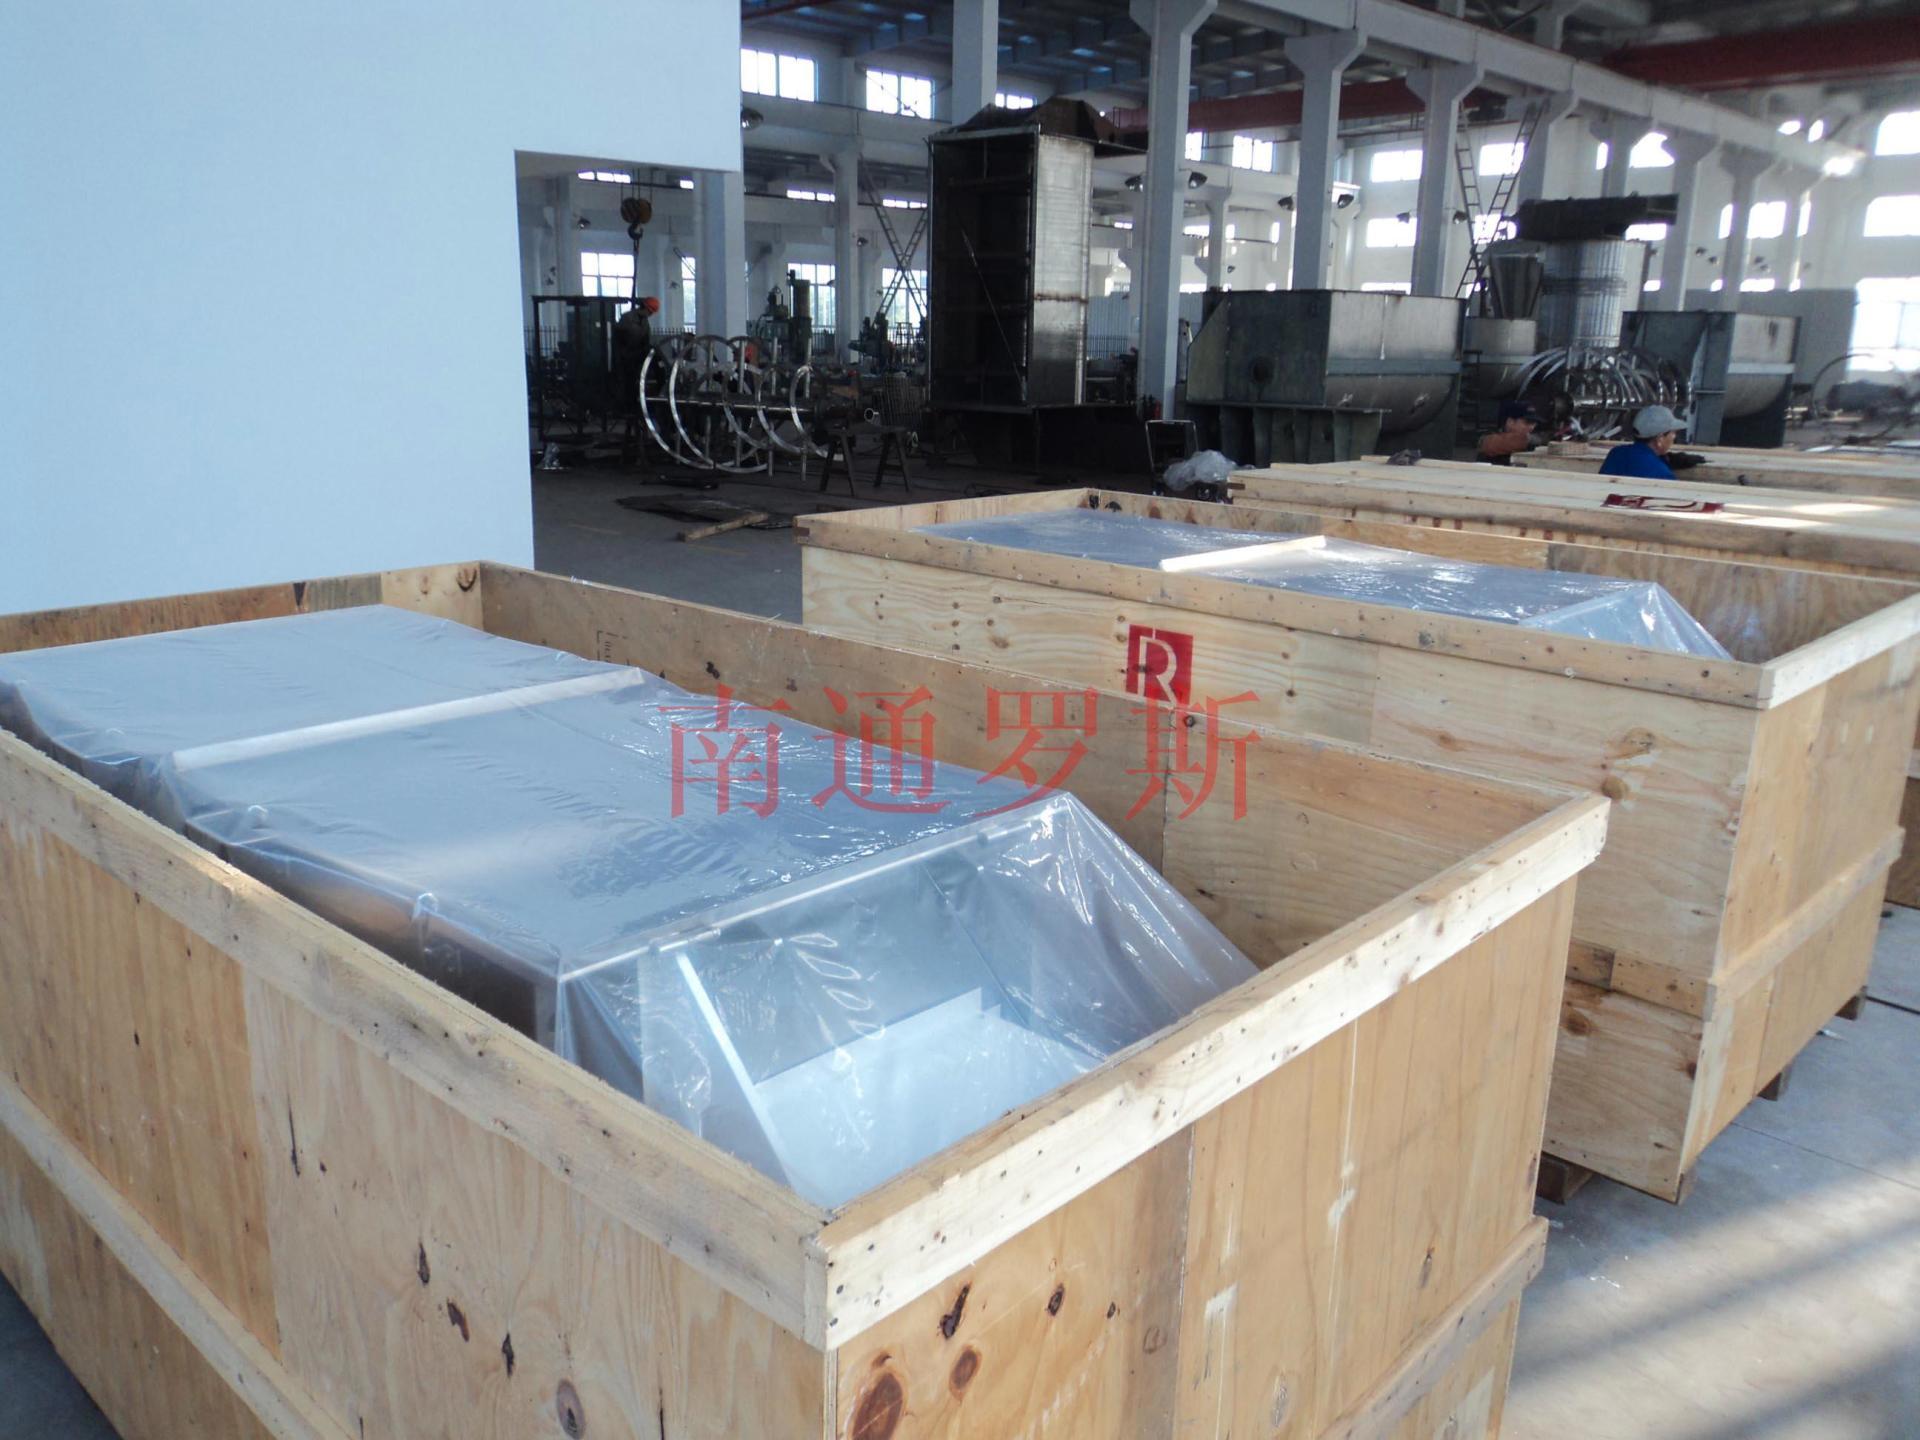 Ribbon mixer exported to Southeast Asia